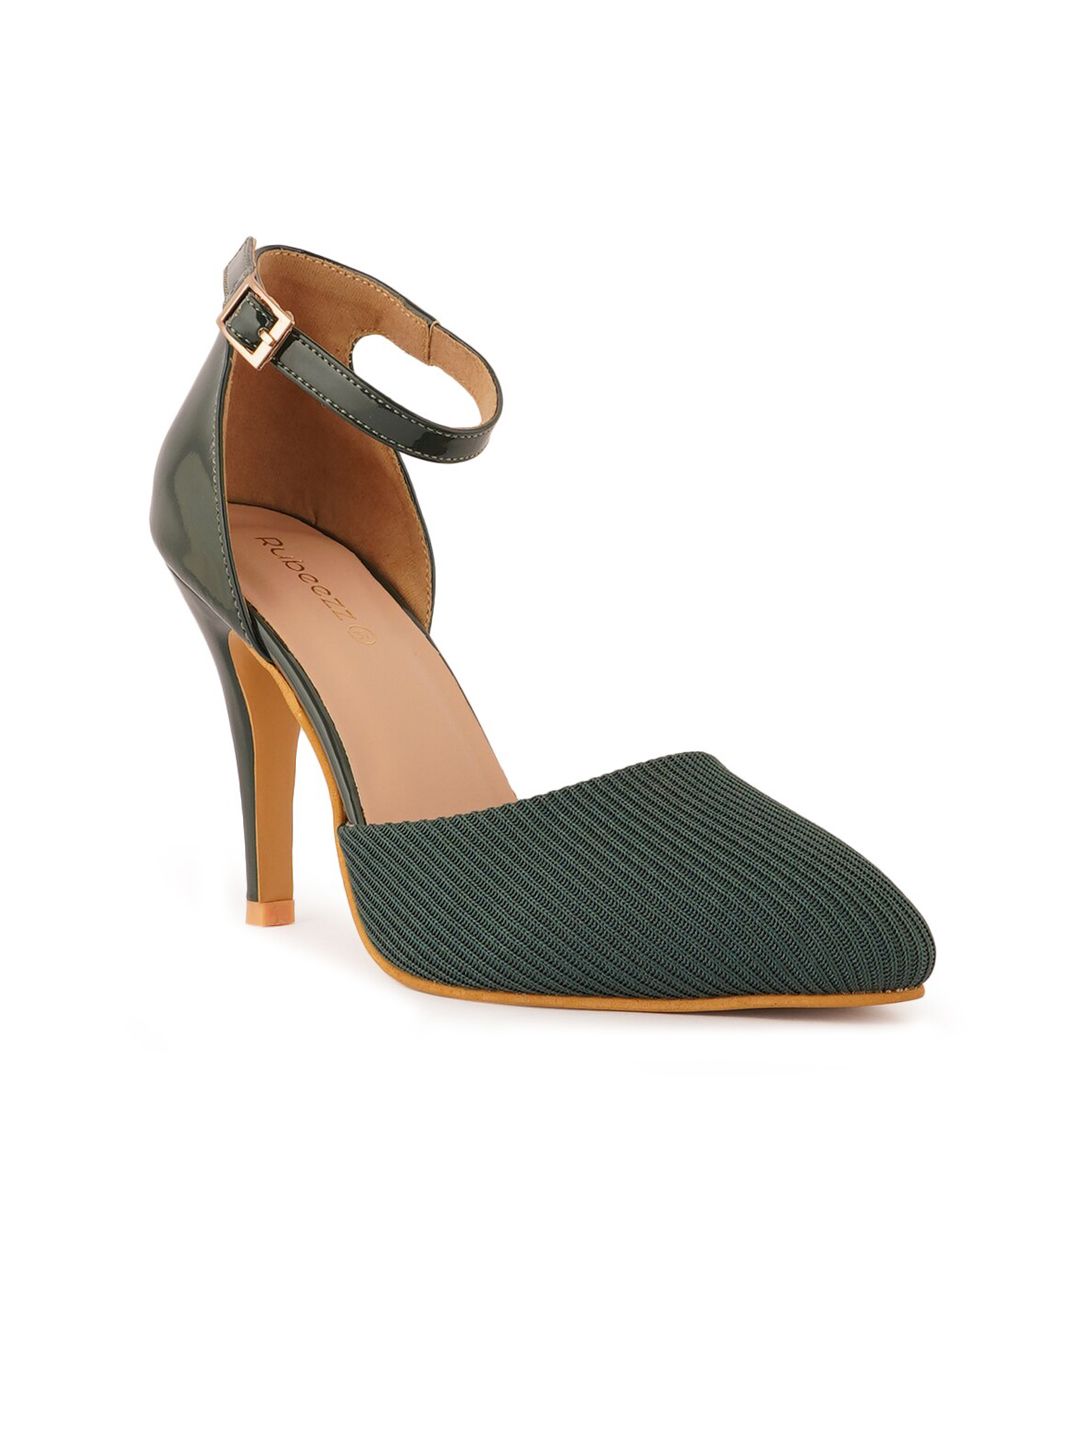 Rubeezz Green Textured Peep Toes with Buckles Price in India